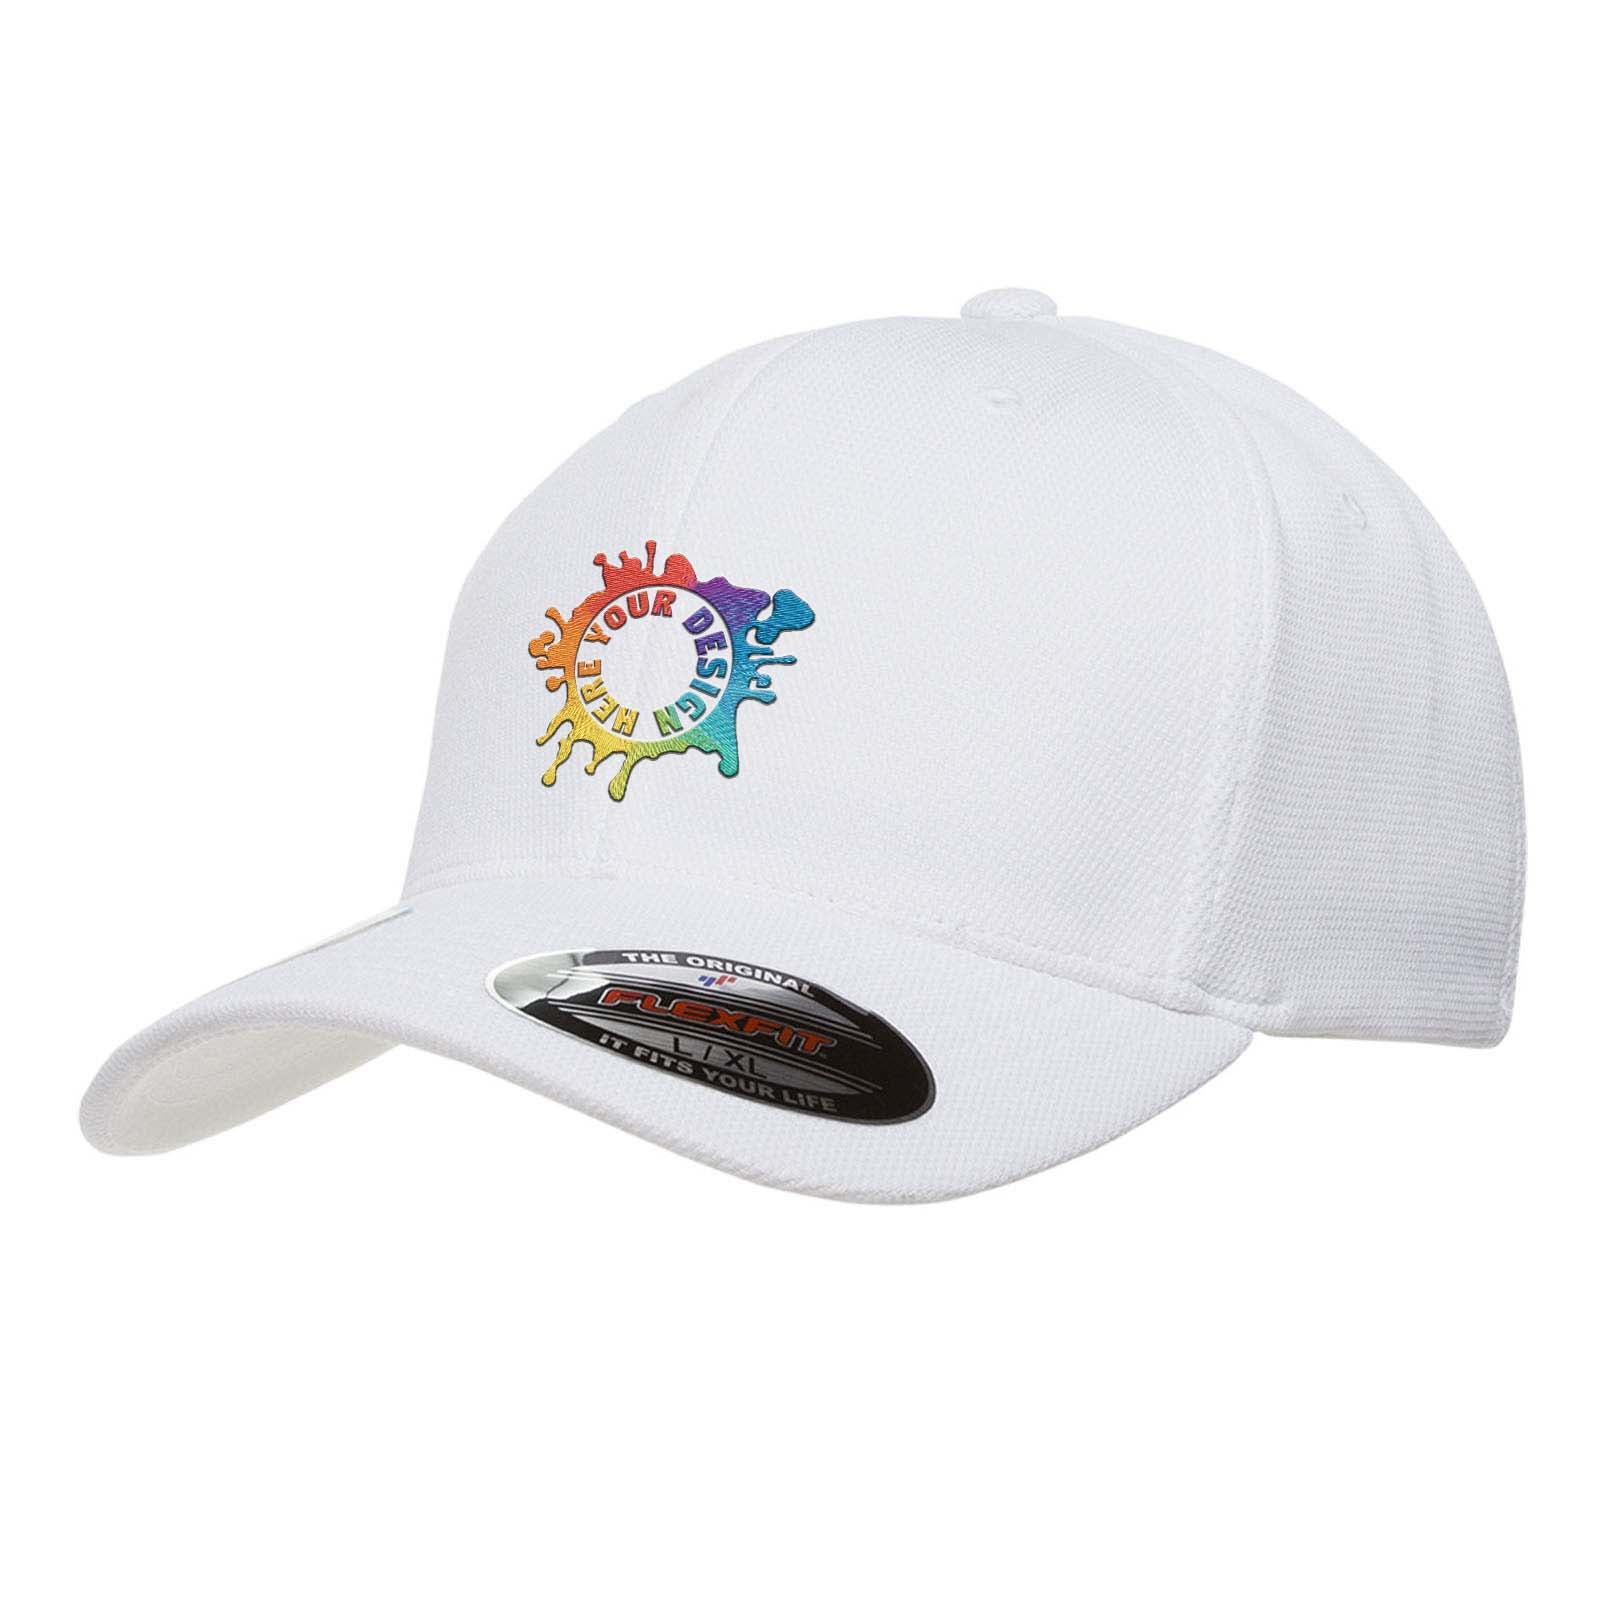 Embroidered Flexfit Adult Cool & Dry Sport Cap - Mato & Hash